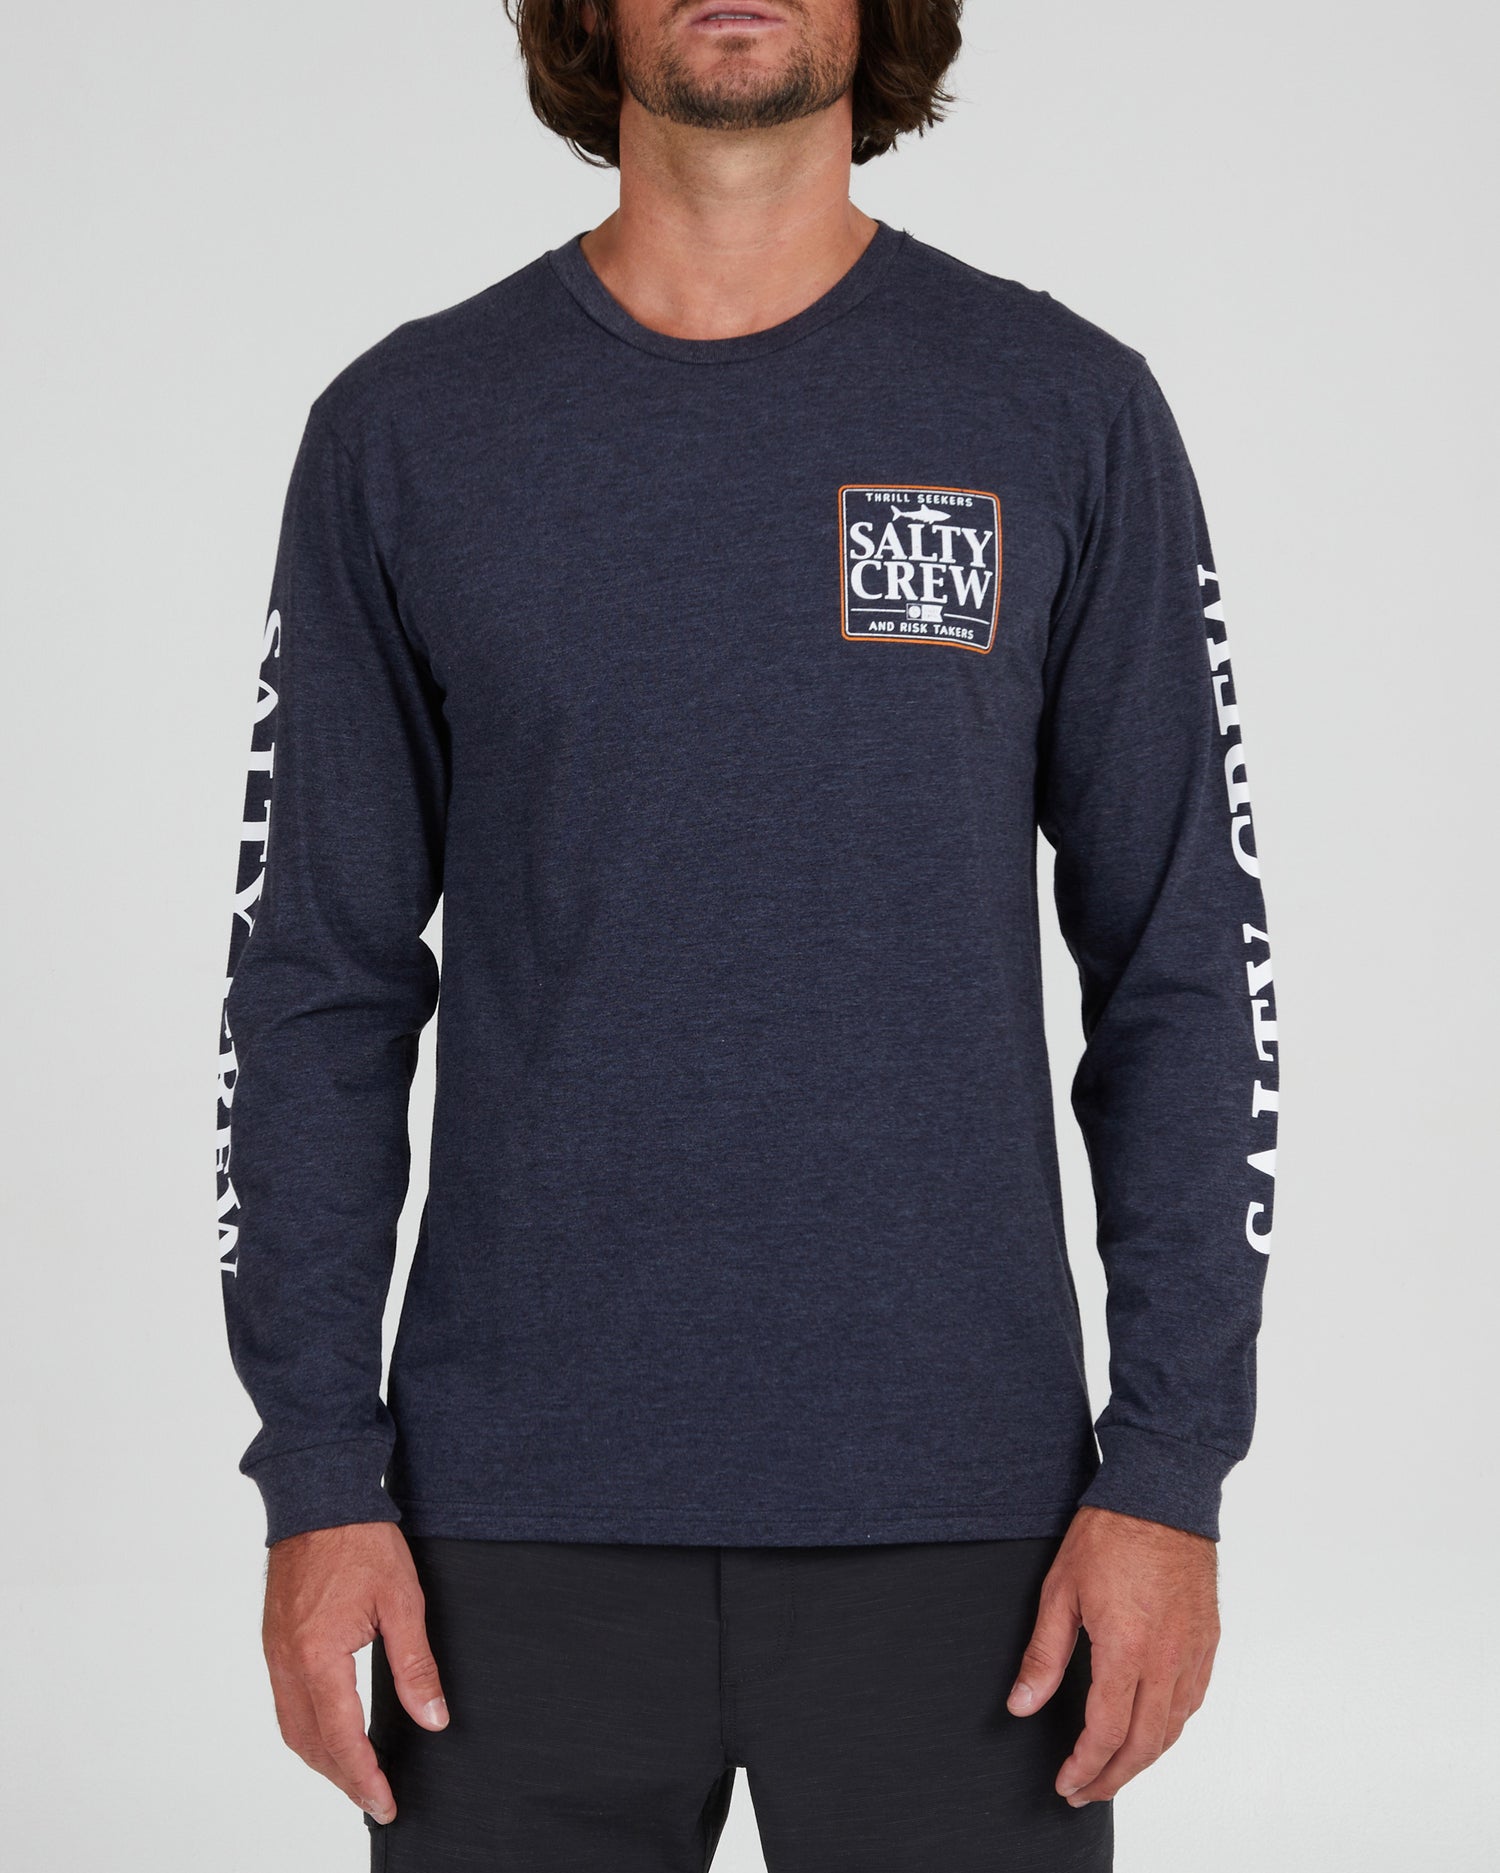 On body front of the Coaster Navy Heather L/S Premium Tee